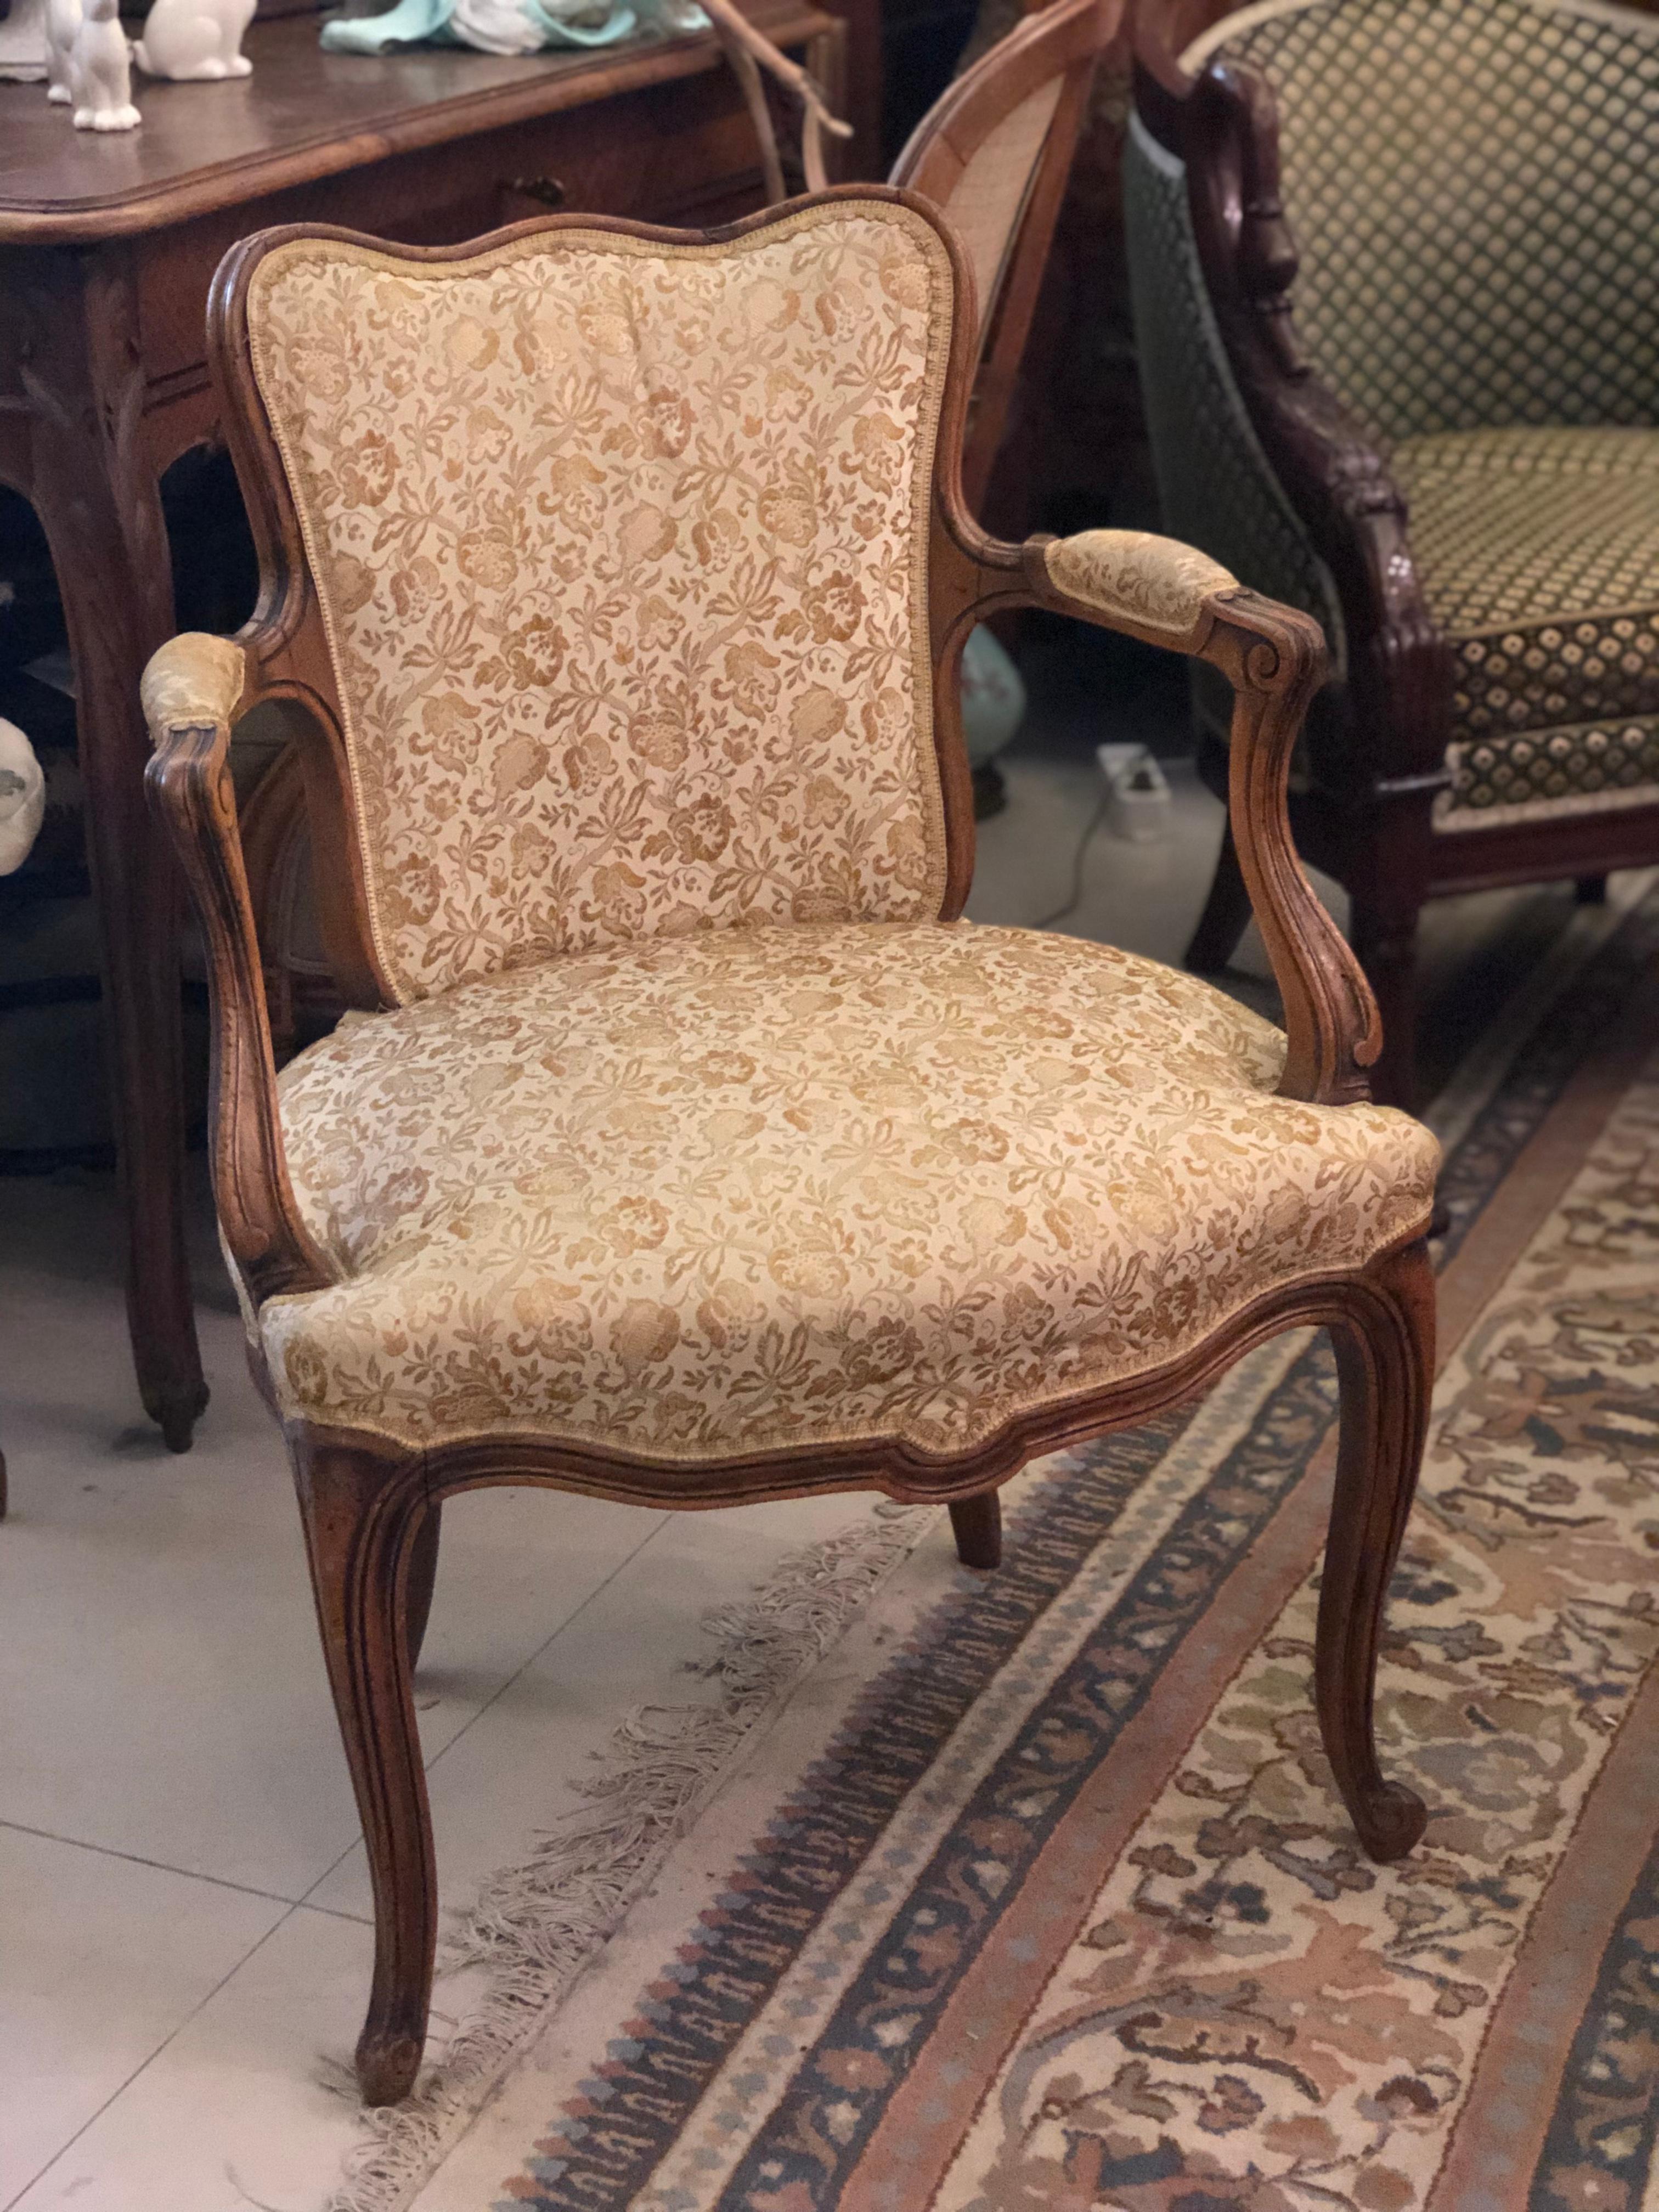 Pair of antique armchairs from France. These chairs are made of solid walnut with curved legs and back and have been reupholstered with a beige fabric with floral motifs. Very comfortable and cozy. Very good condition, France, circa 1880.